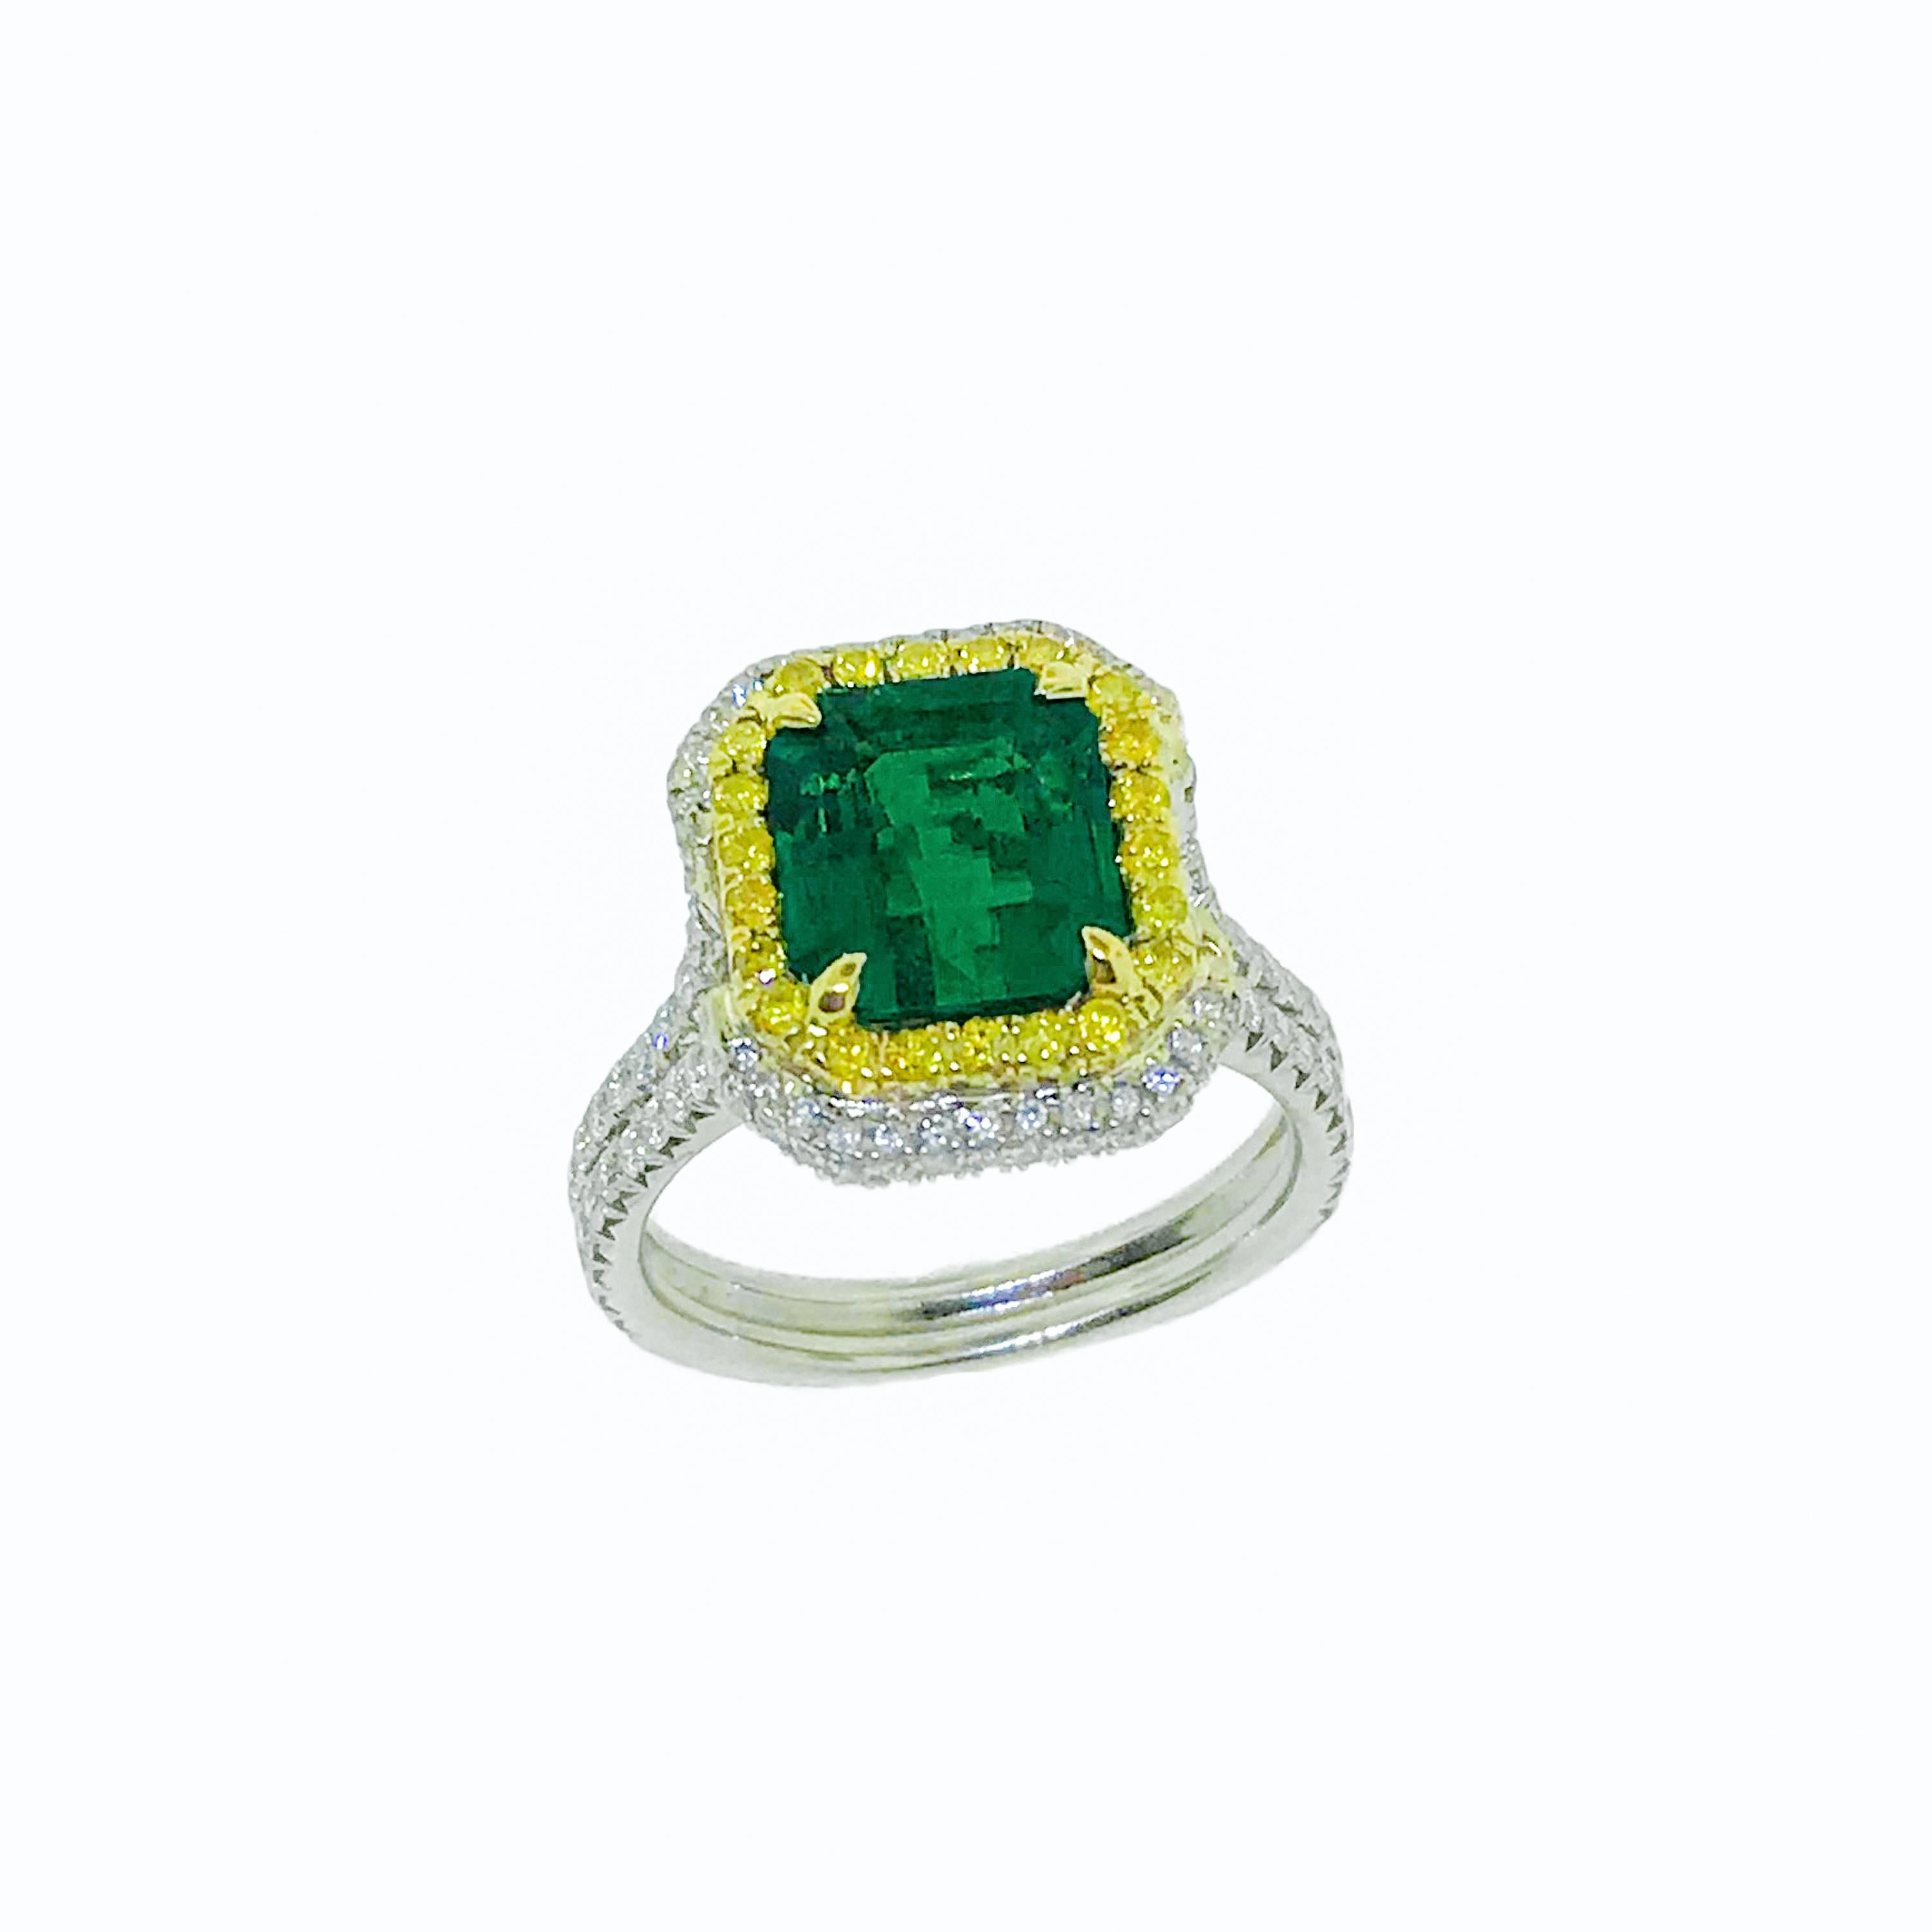 Contemporary Stunning 2.76 Carat Colombian Emerald and Diamond Ring For Sale